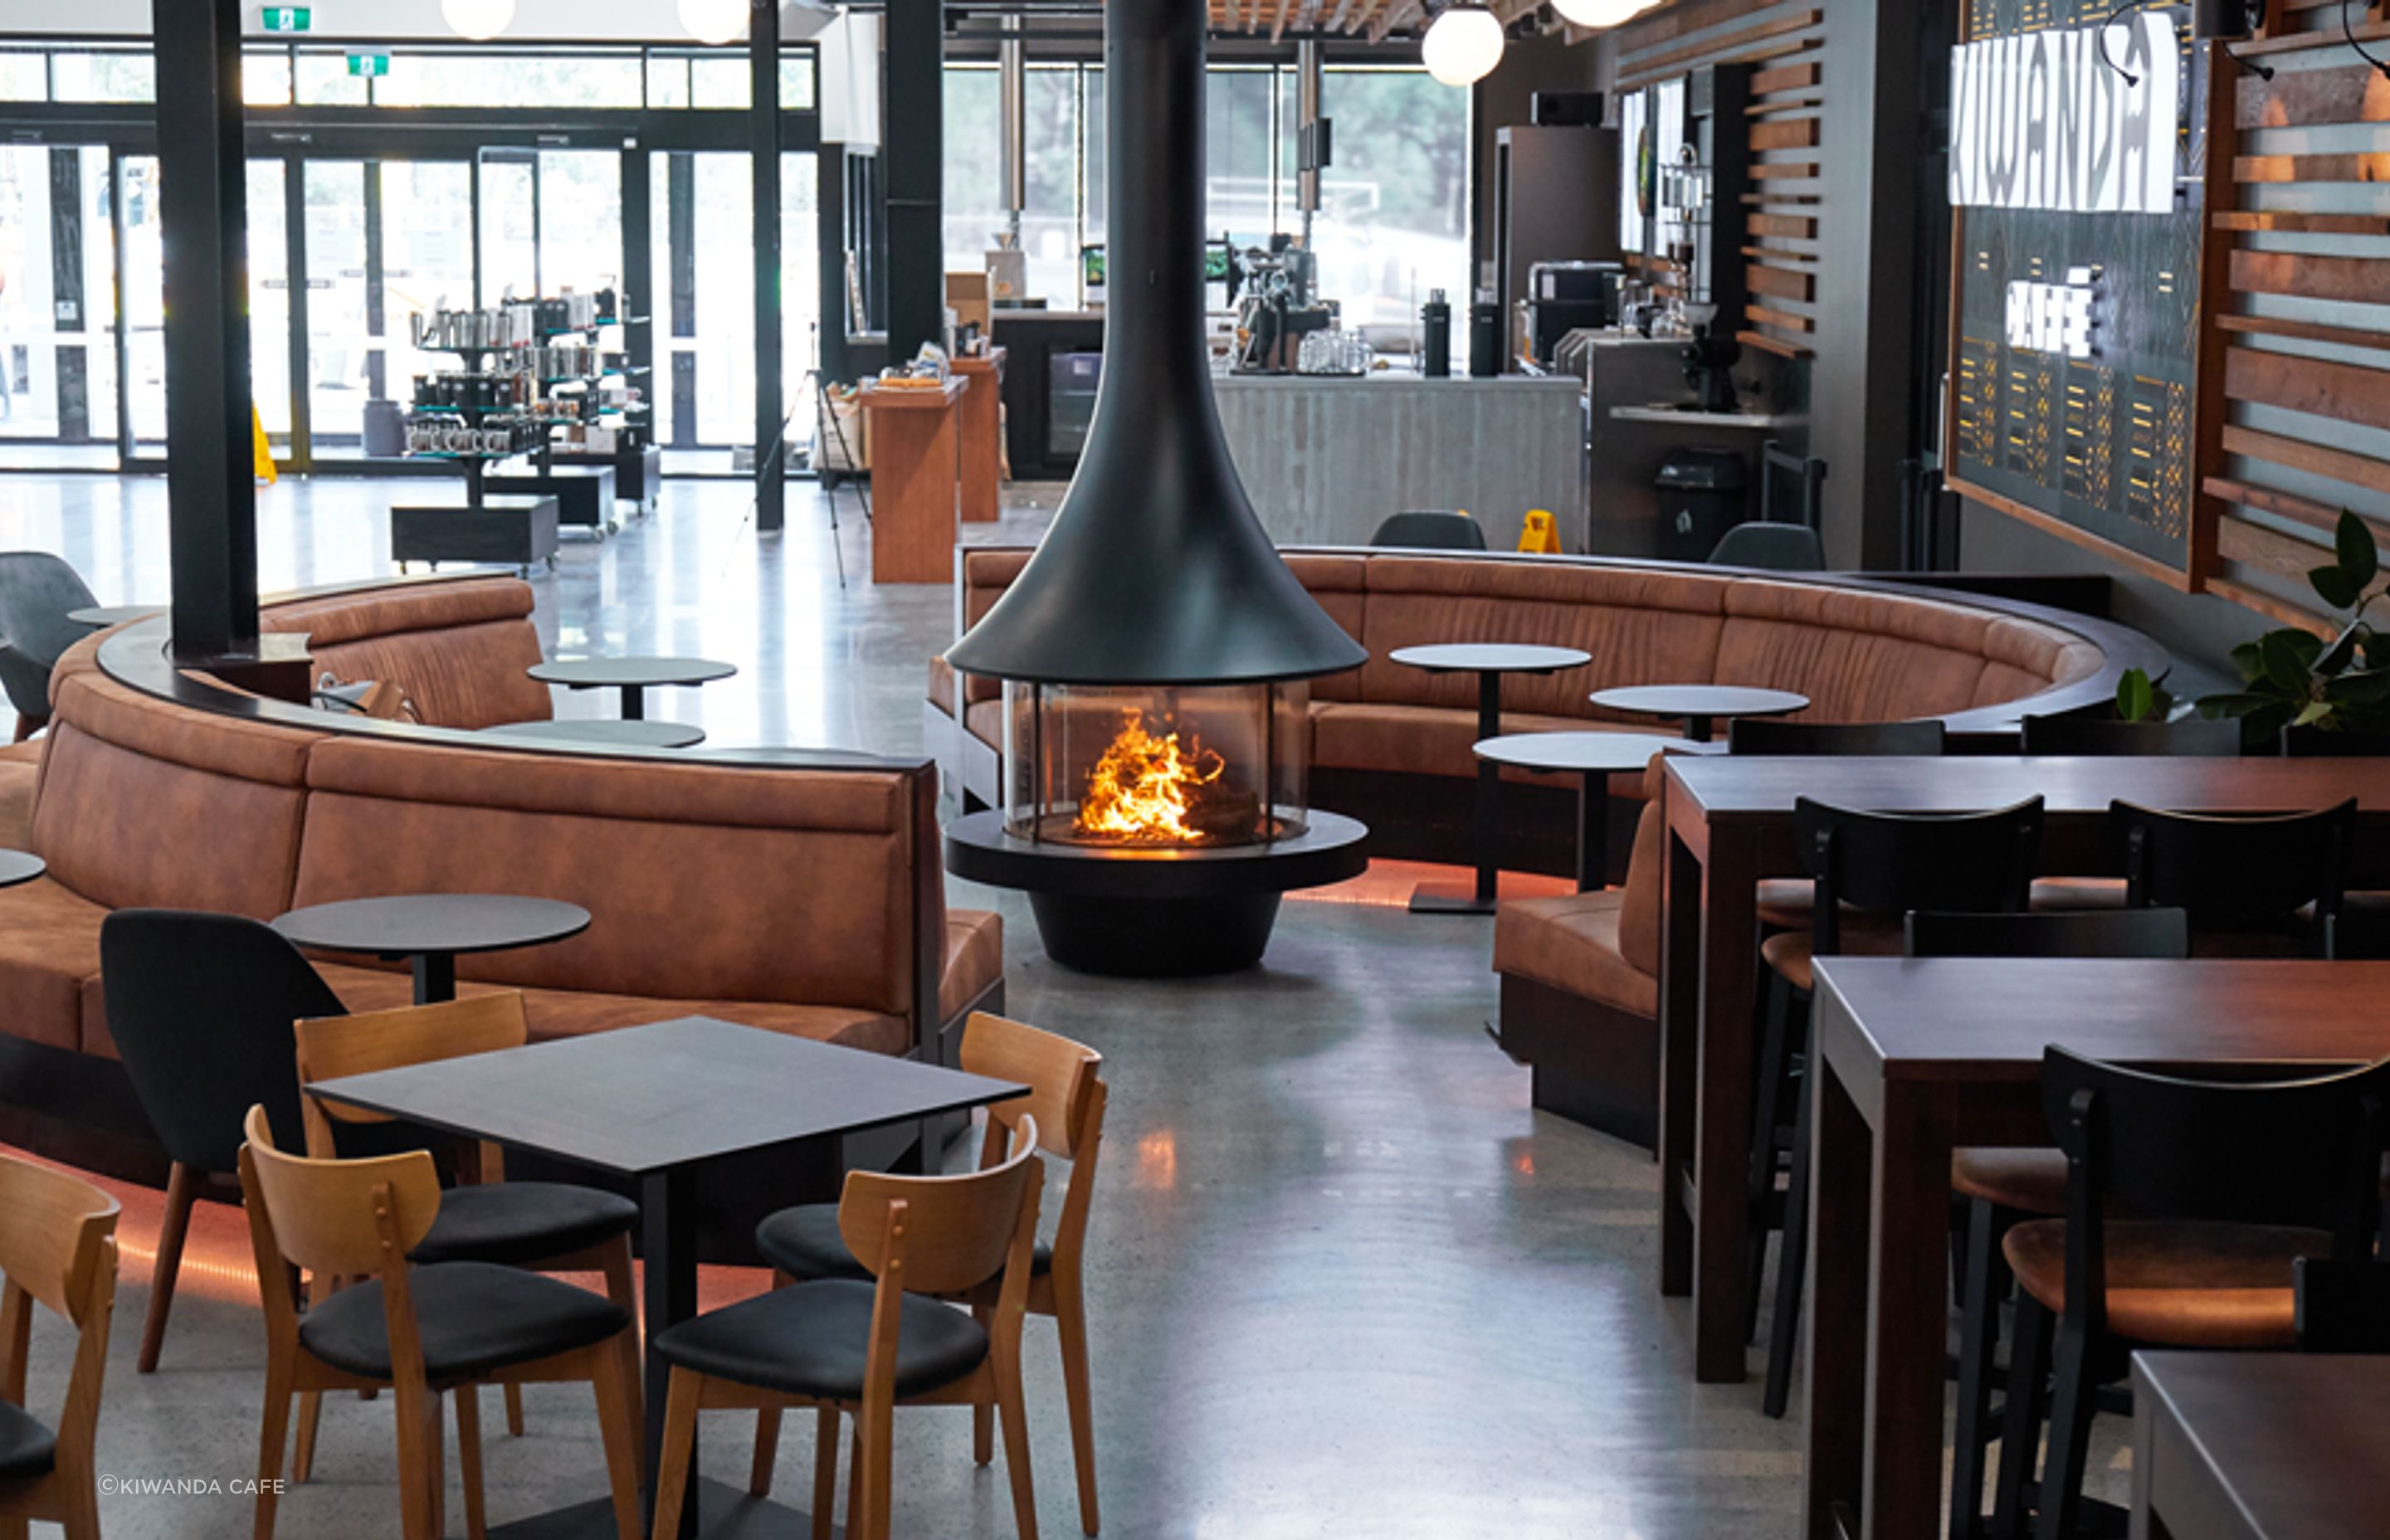 The JC Bordelet Eva 992 wood fireplace, providing a place for customers to enjoy an artisan coffee in a relaxed ambient environment